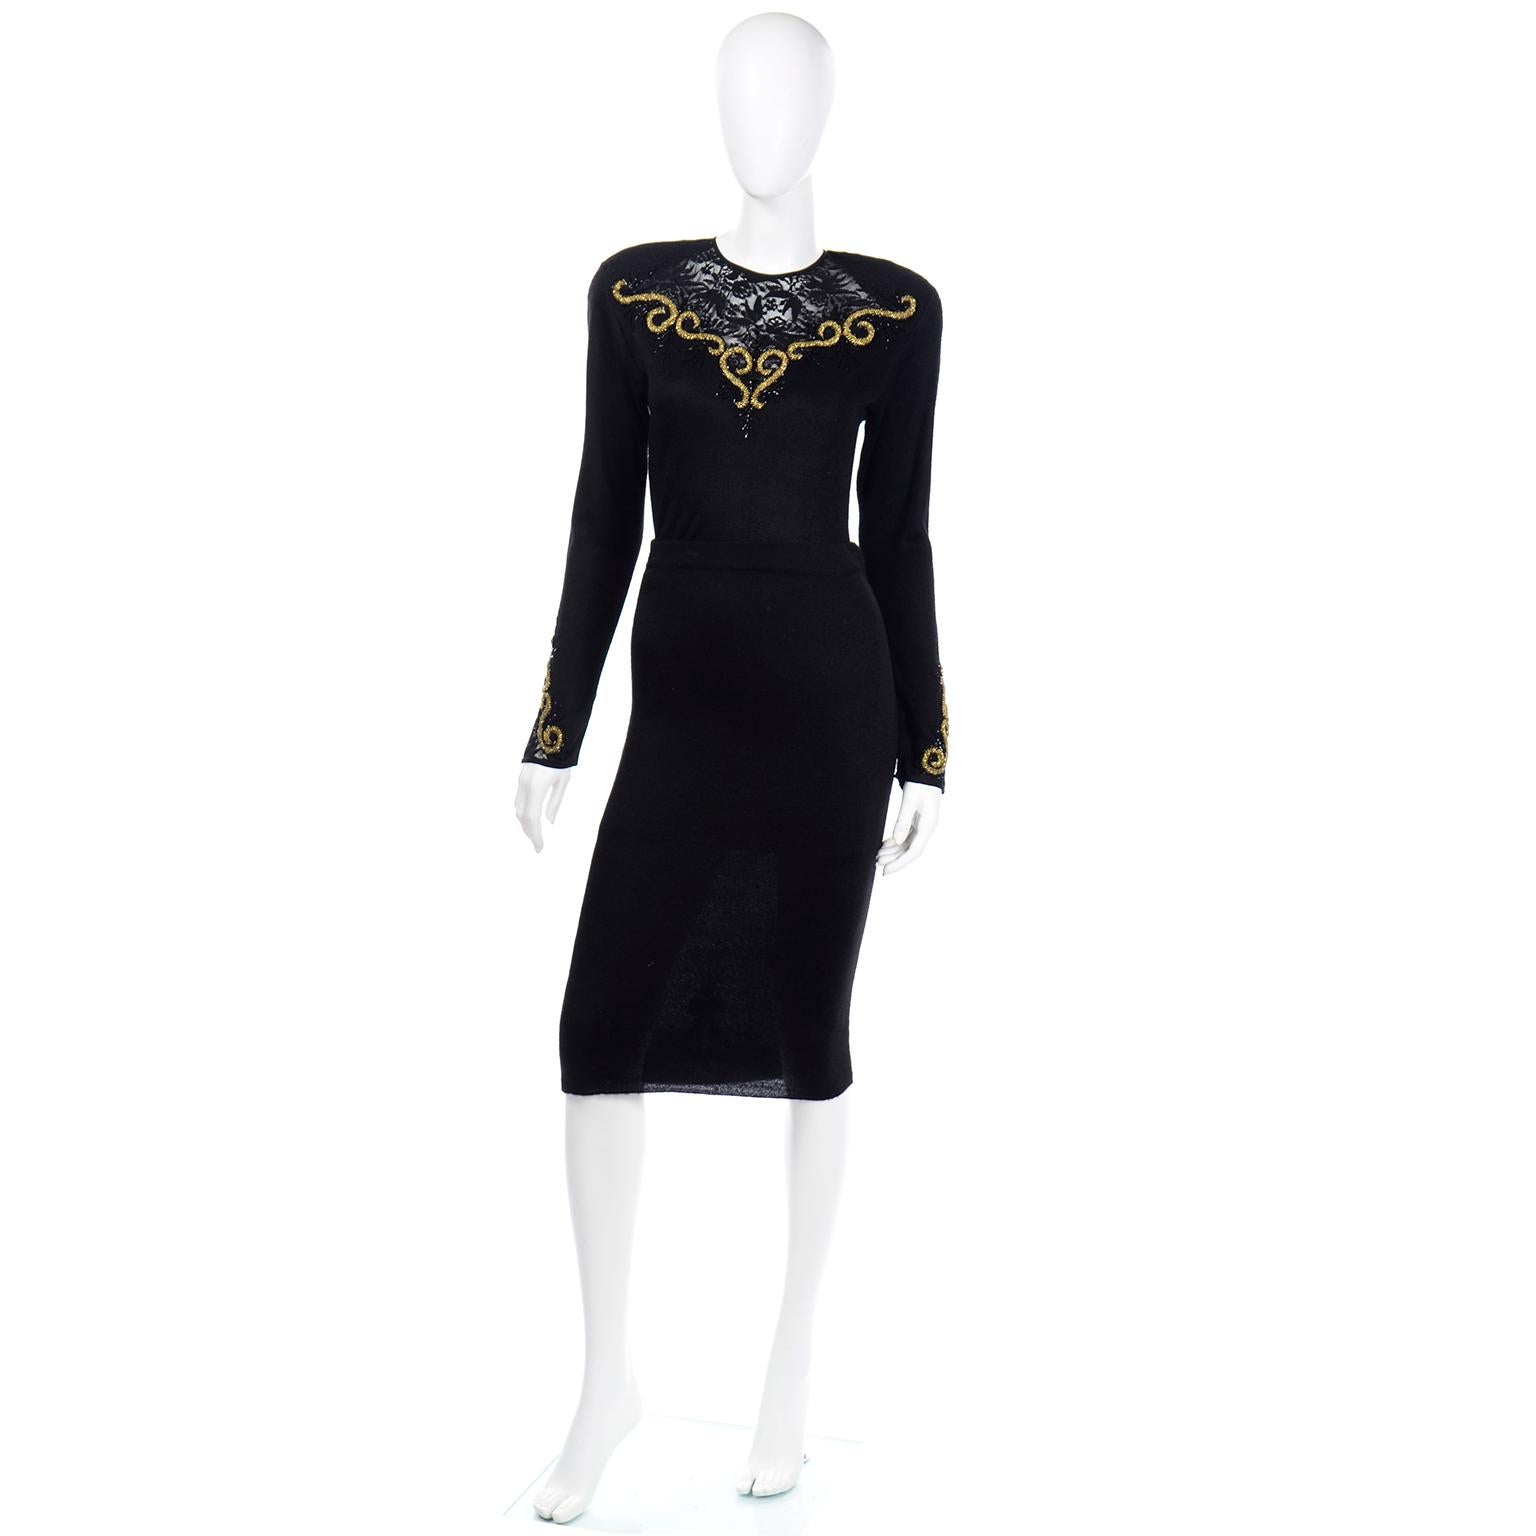 This 2 piece vintage Diane Freis black evening ensemble has so many unique details that make it really special! The dress is in a luxe rayon knit and has sheer black lace, black beads and thick metallic gold bead embroidery on the bodice, at the